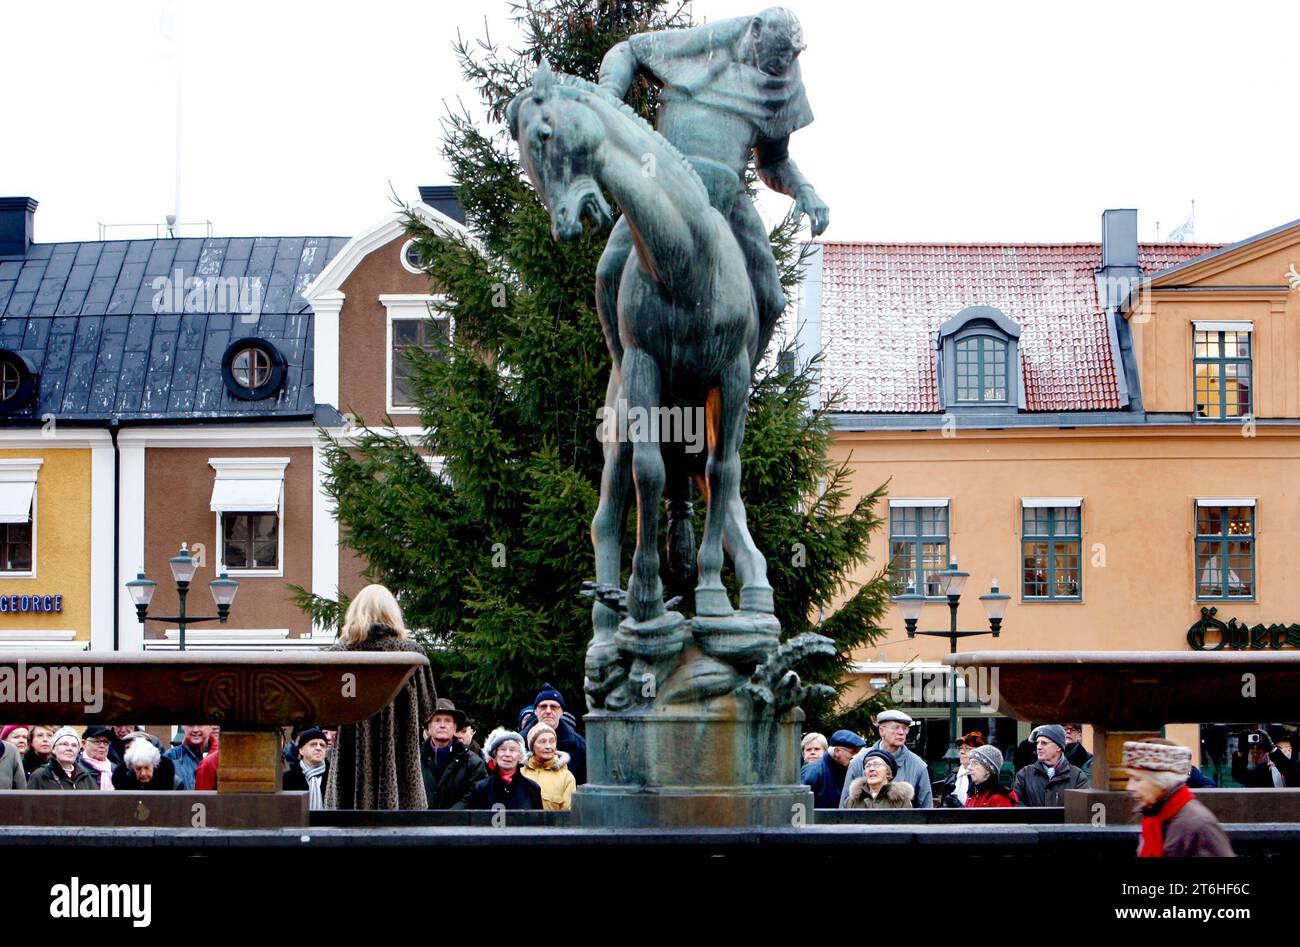 The Folke Filbyter statue, on Stora Torget in Linköping, Sweden, turns 80 years old. Stock Photo